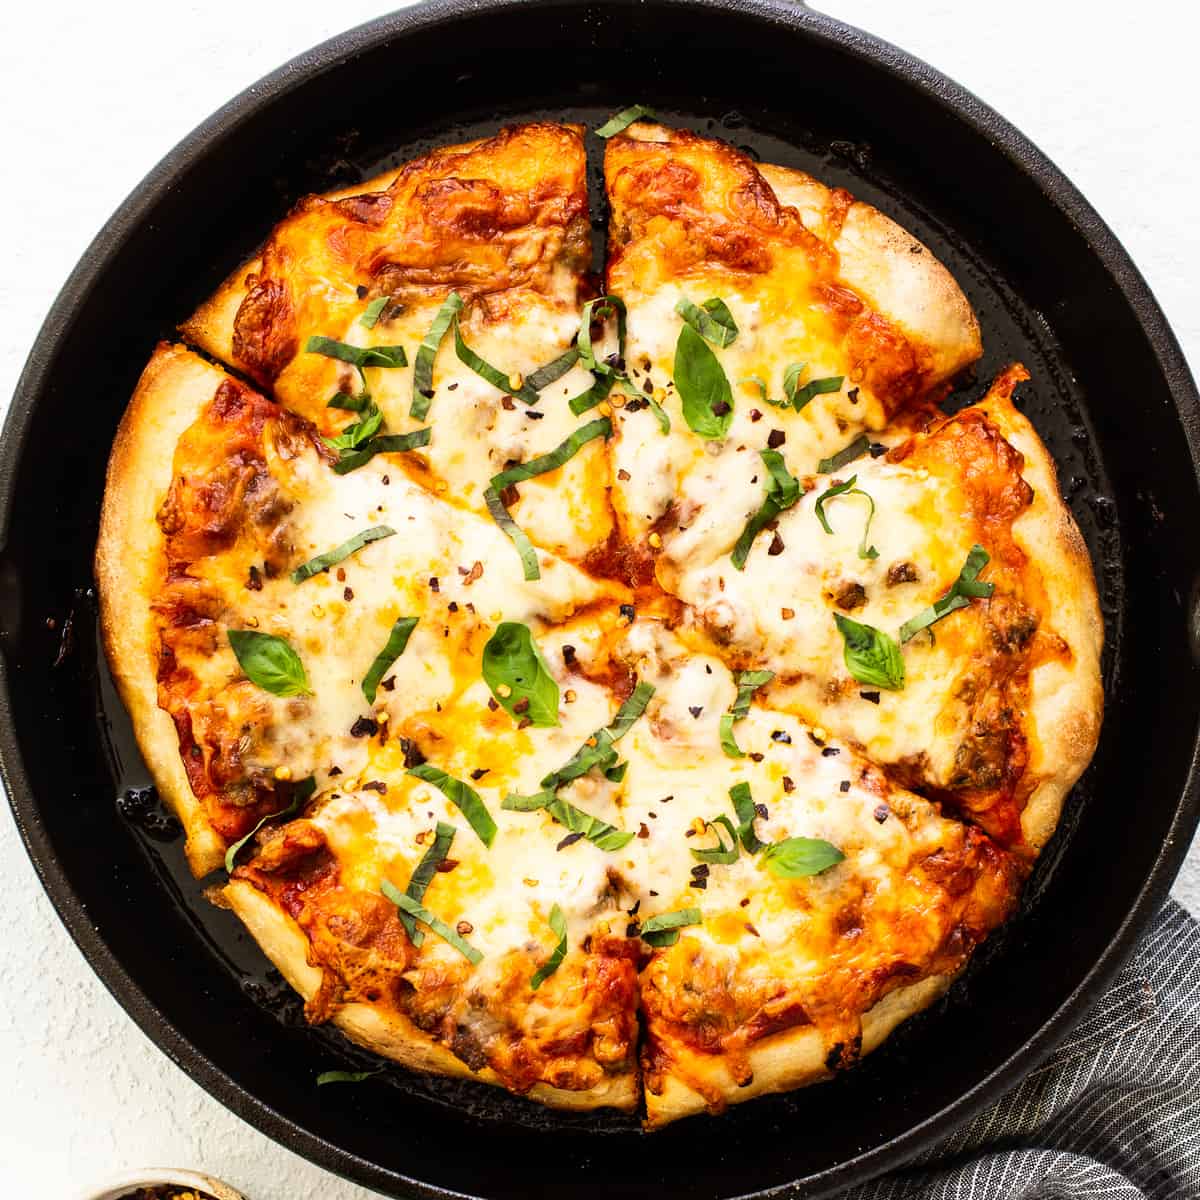 https://fitfoodiefinds.com/wp-content/uploads/2022/04/Cast-Iron-Pizza-sq.jpg